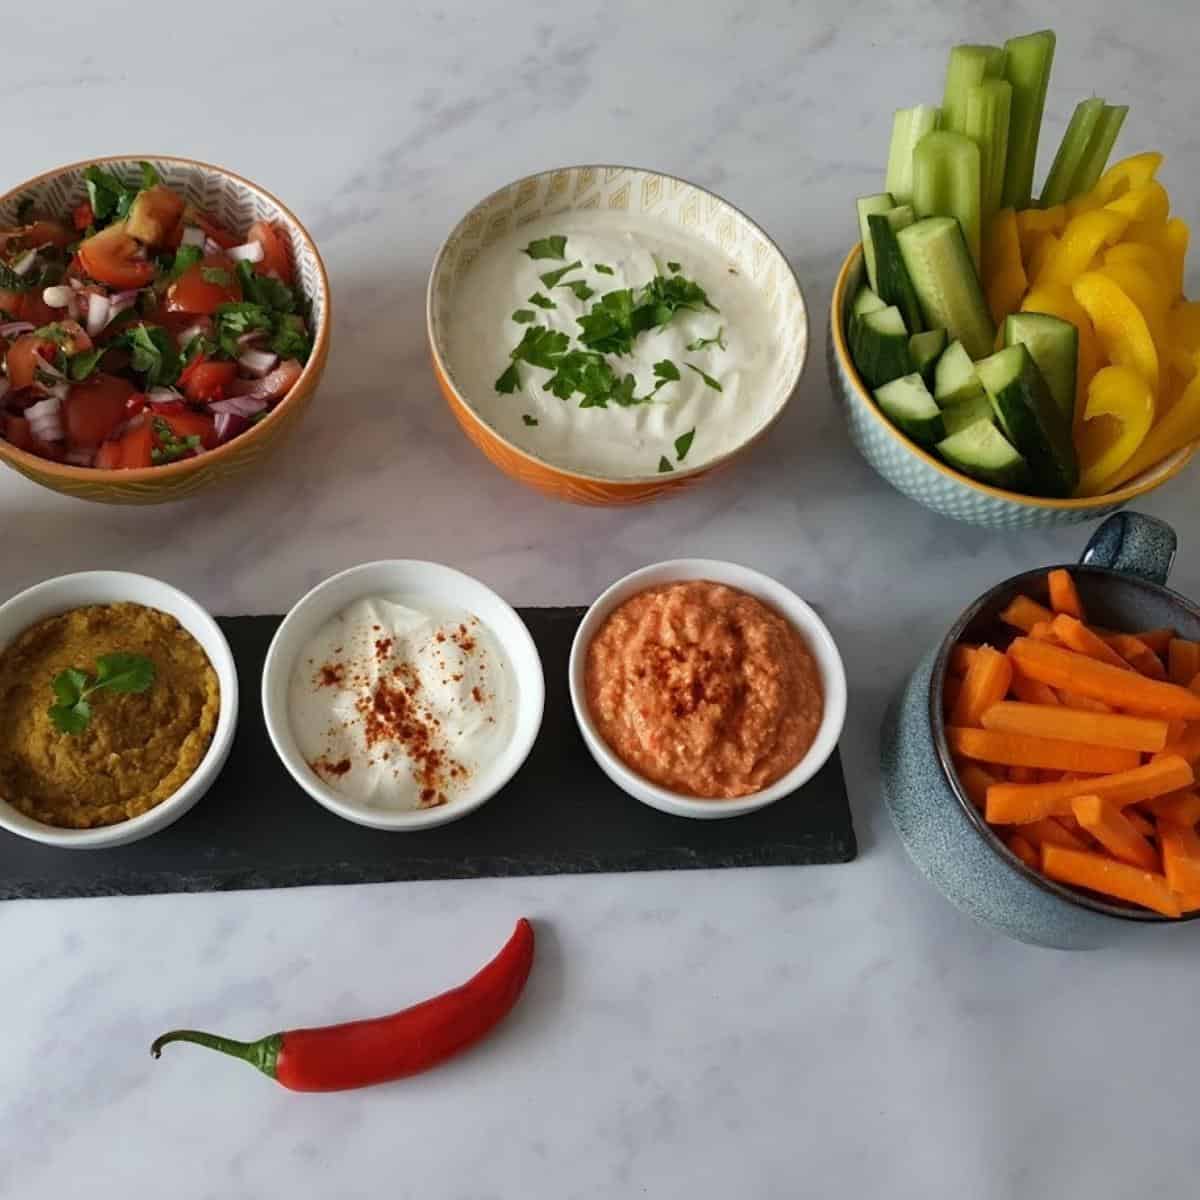 Homemade low-calorie dip recipes – unofficial Slimming World dips